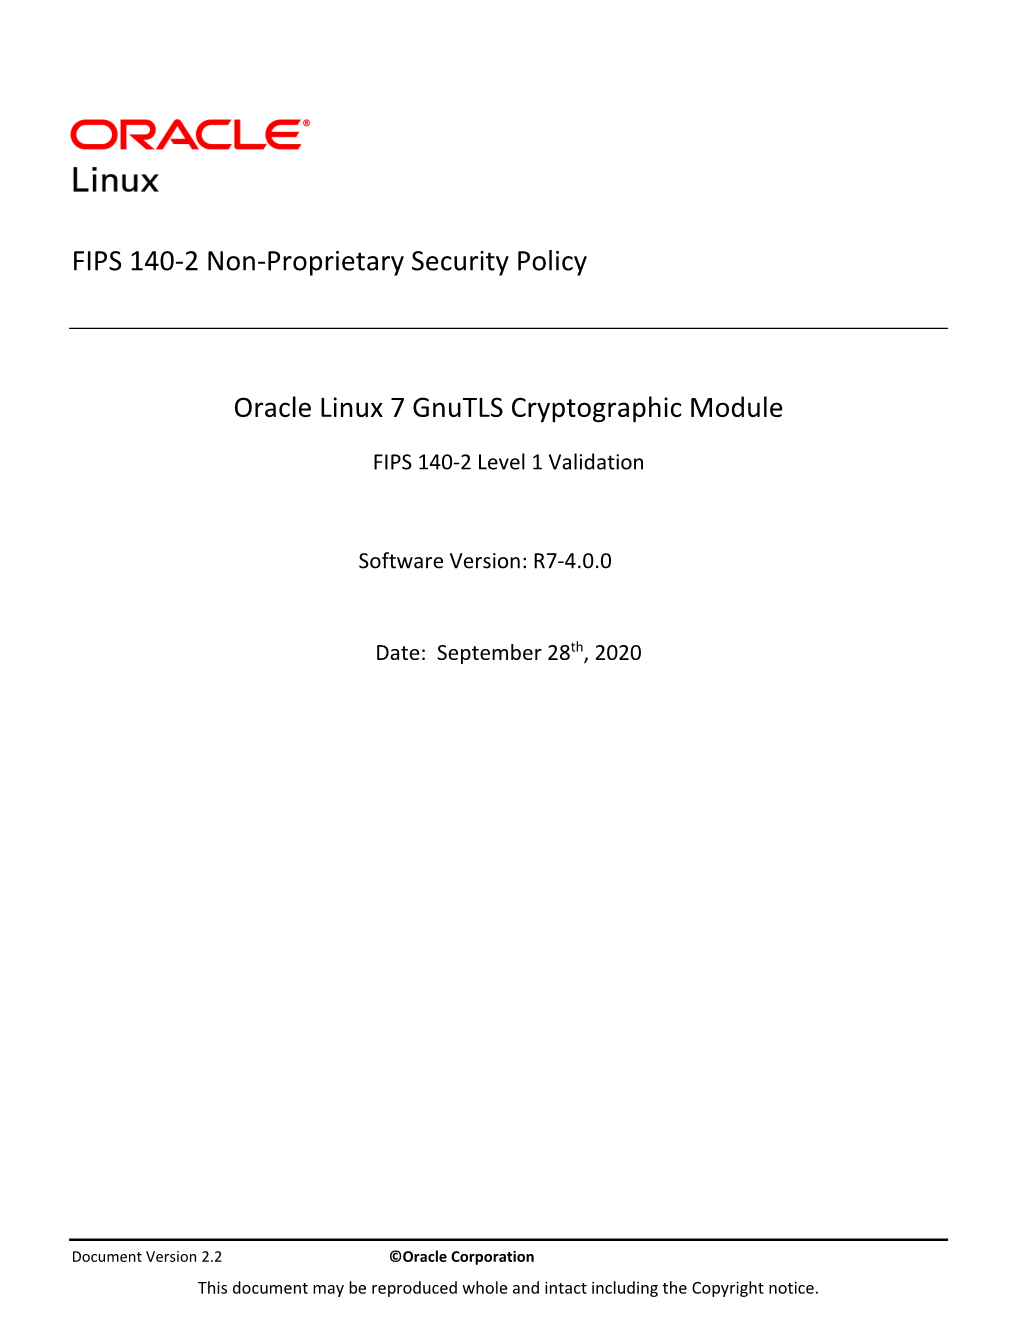 FIPS 140-2 Non-Proprietary Security Policy Oracle Linux 7 Gnutls